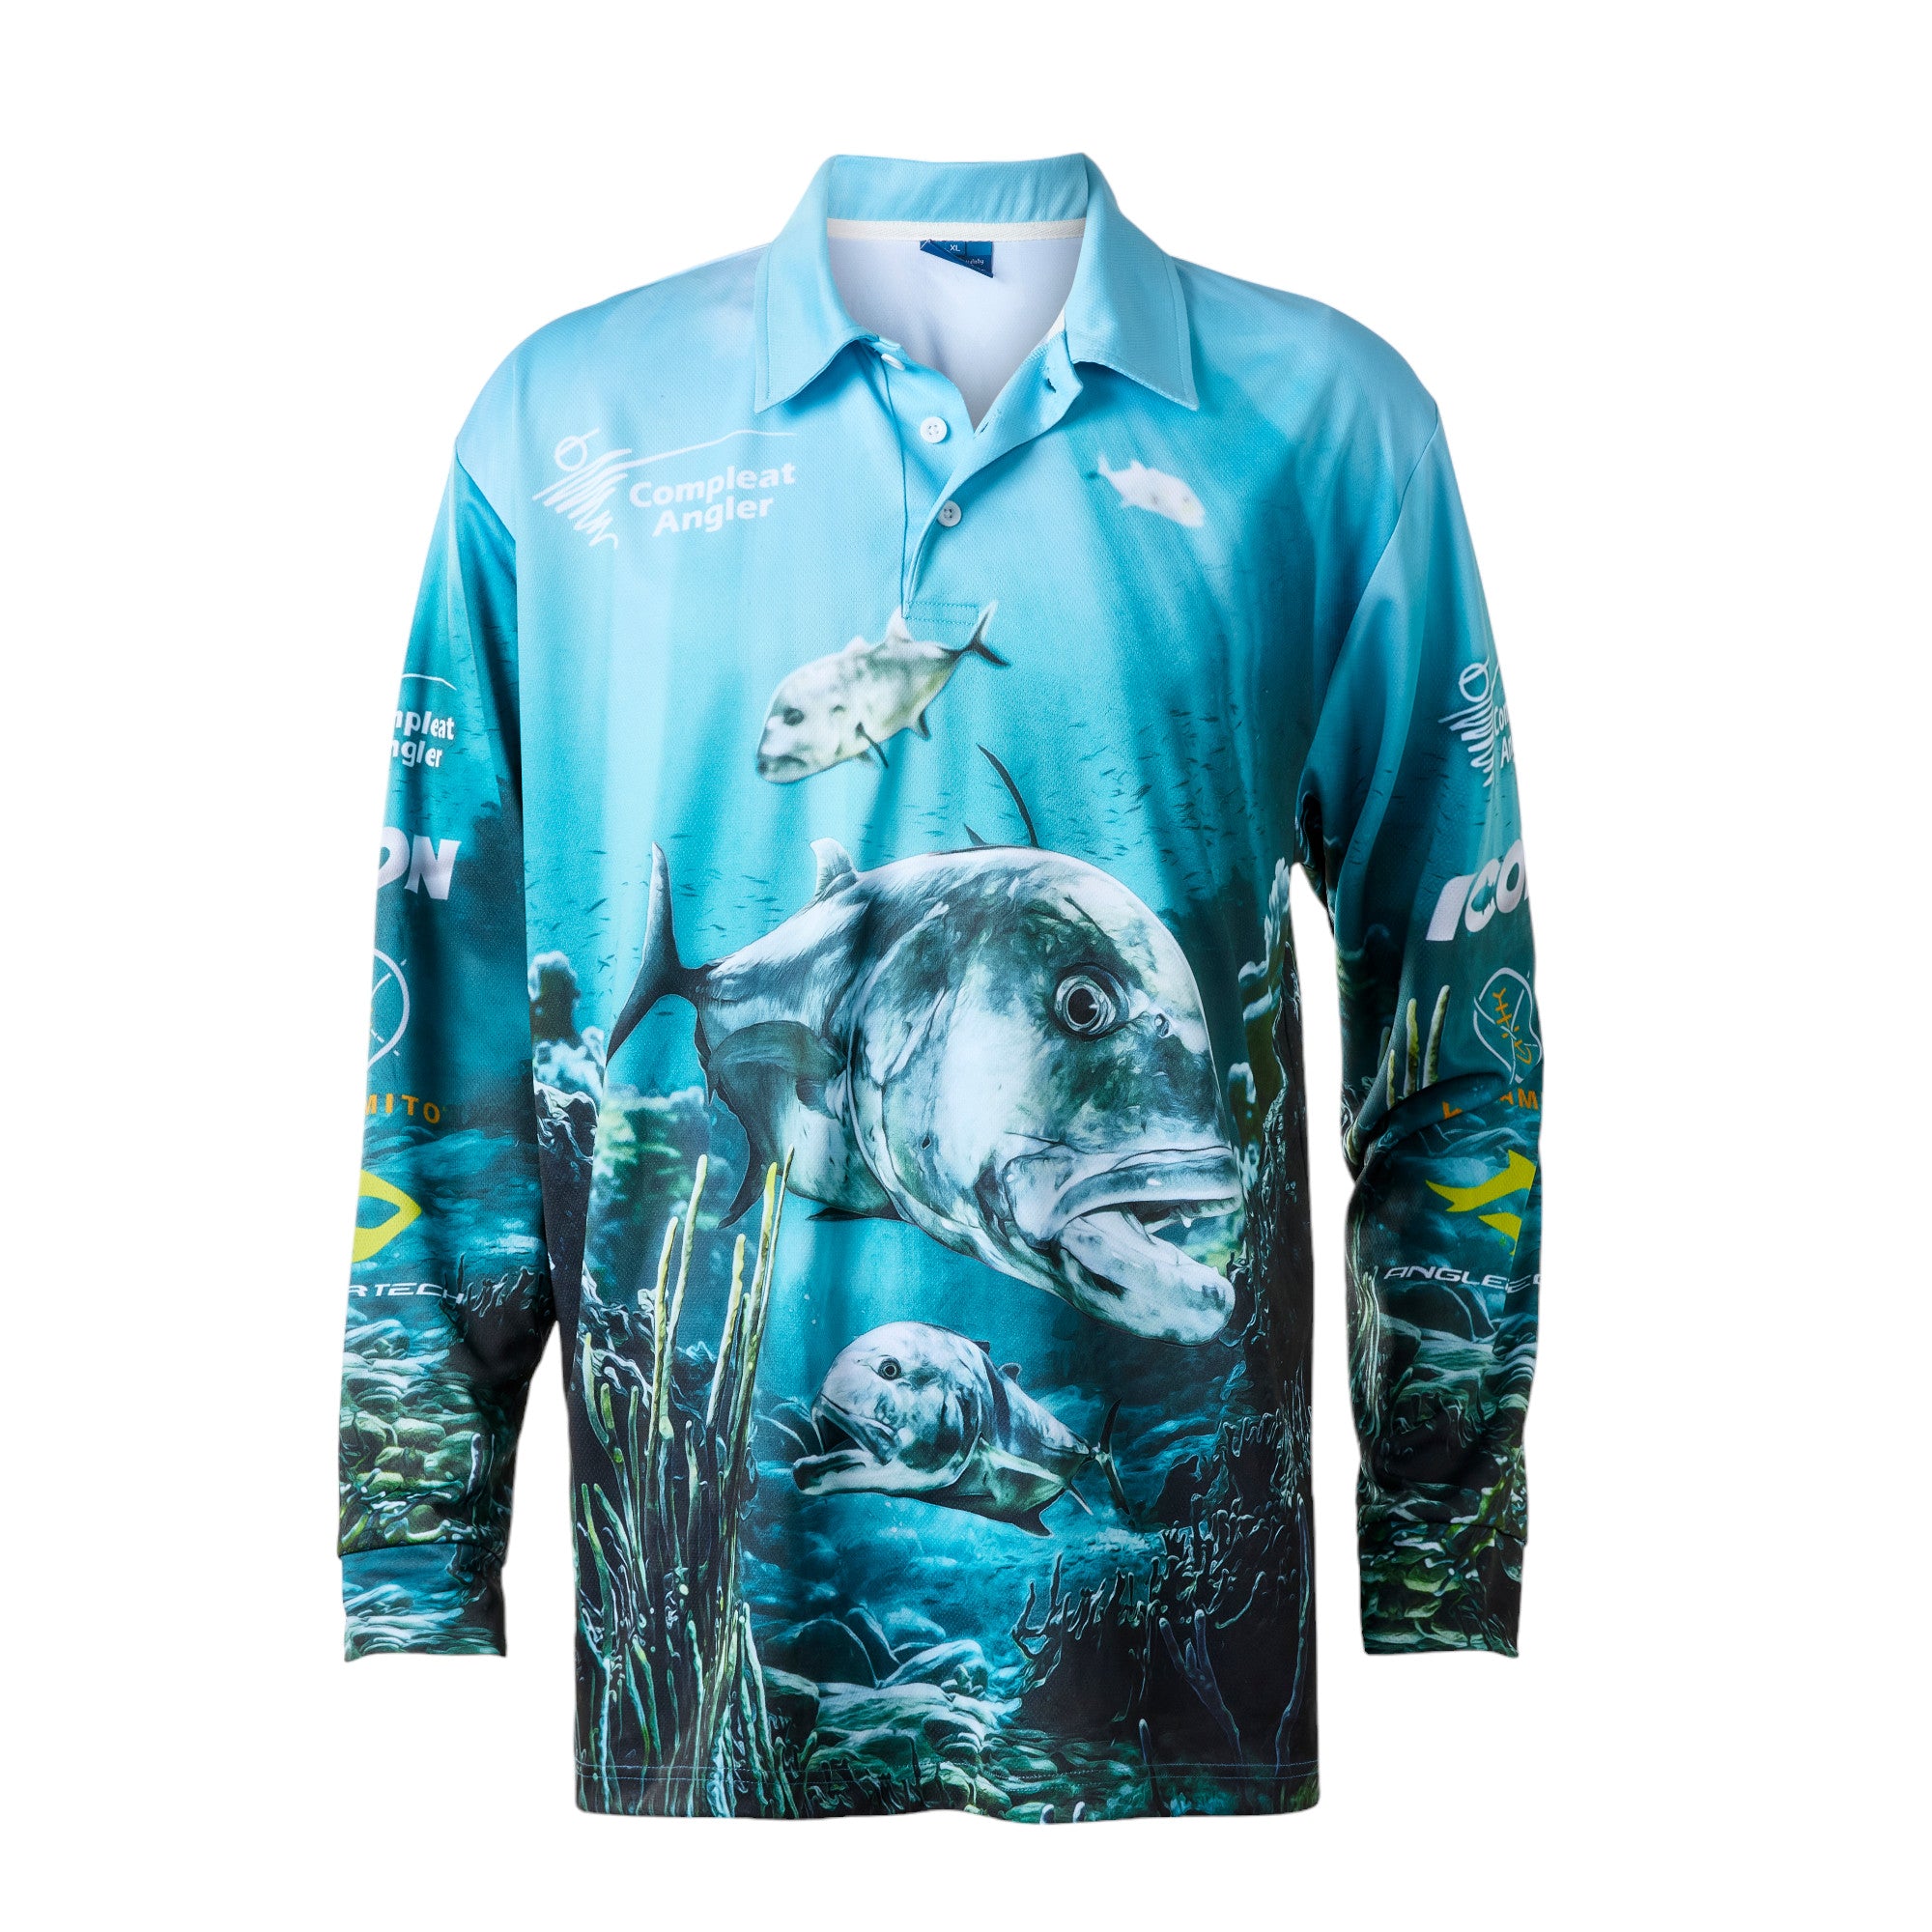 Compleat Angler GT Fishing Shirt